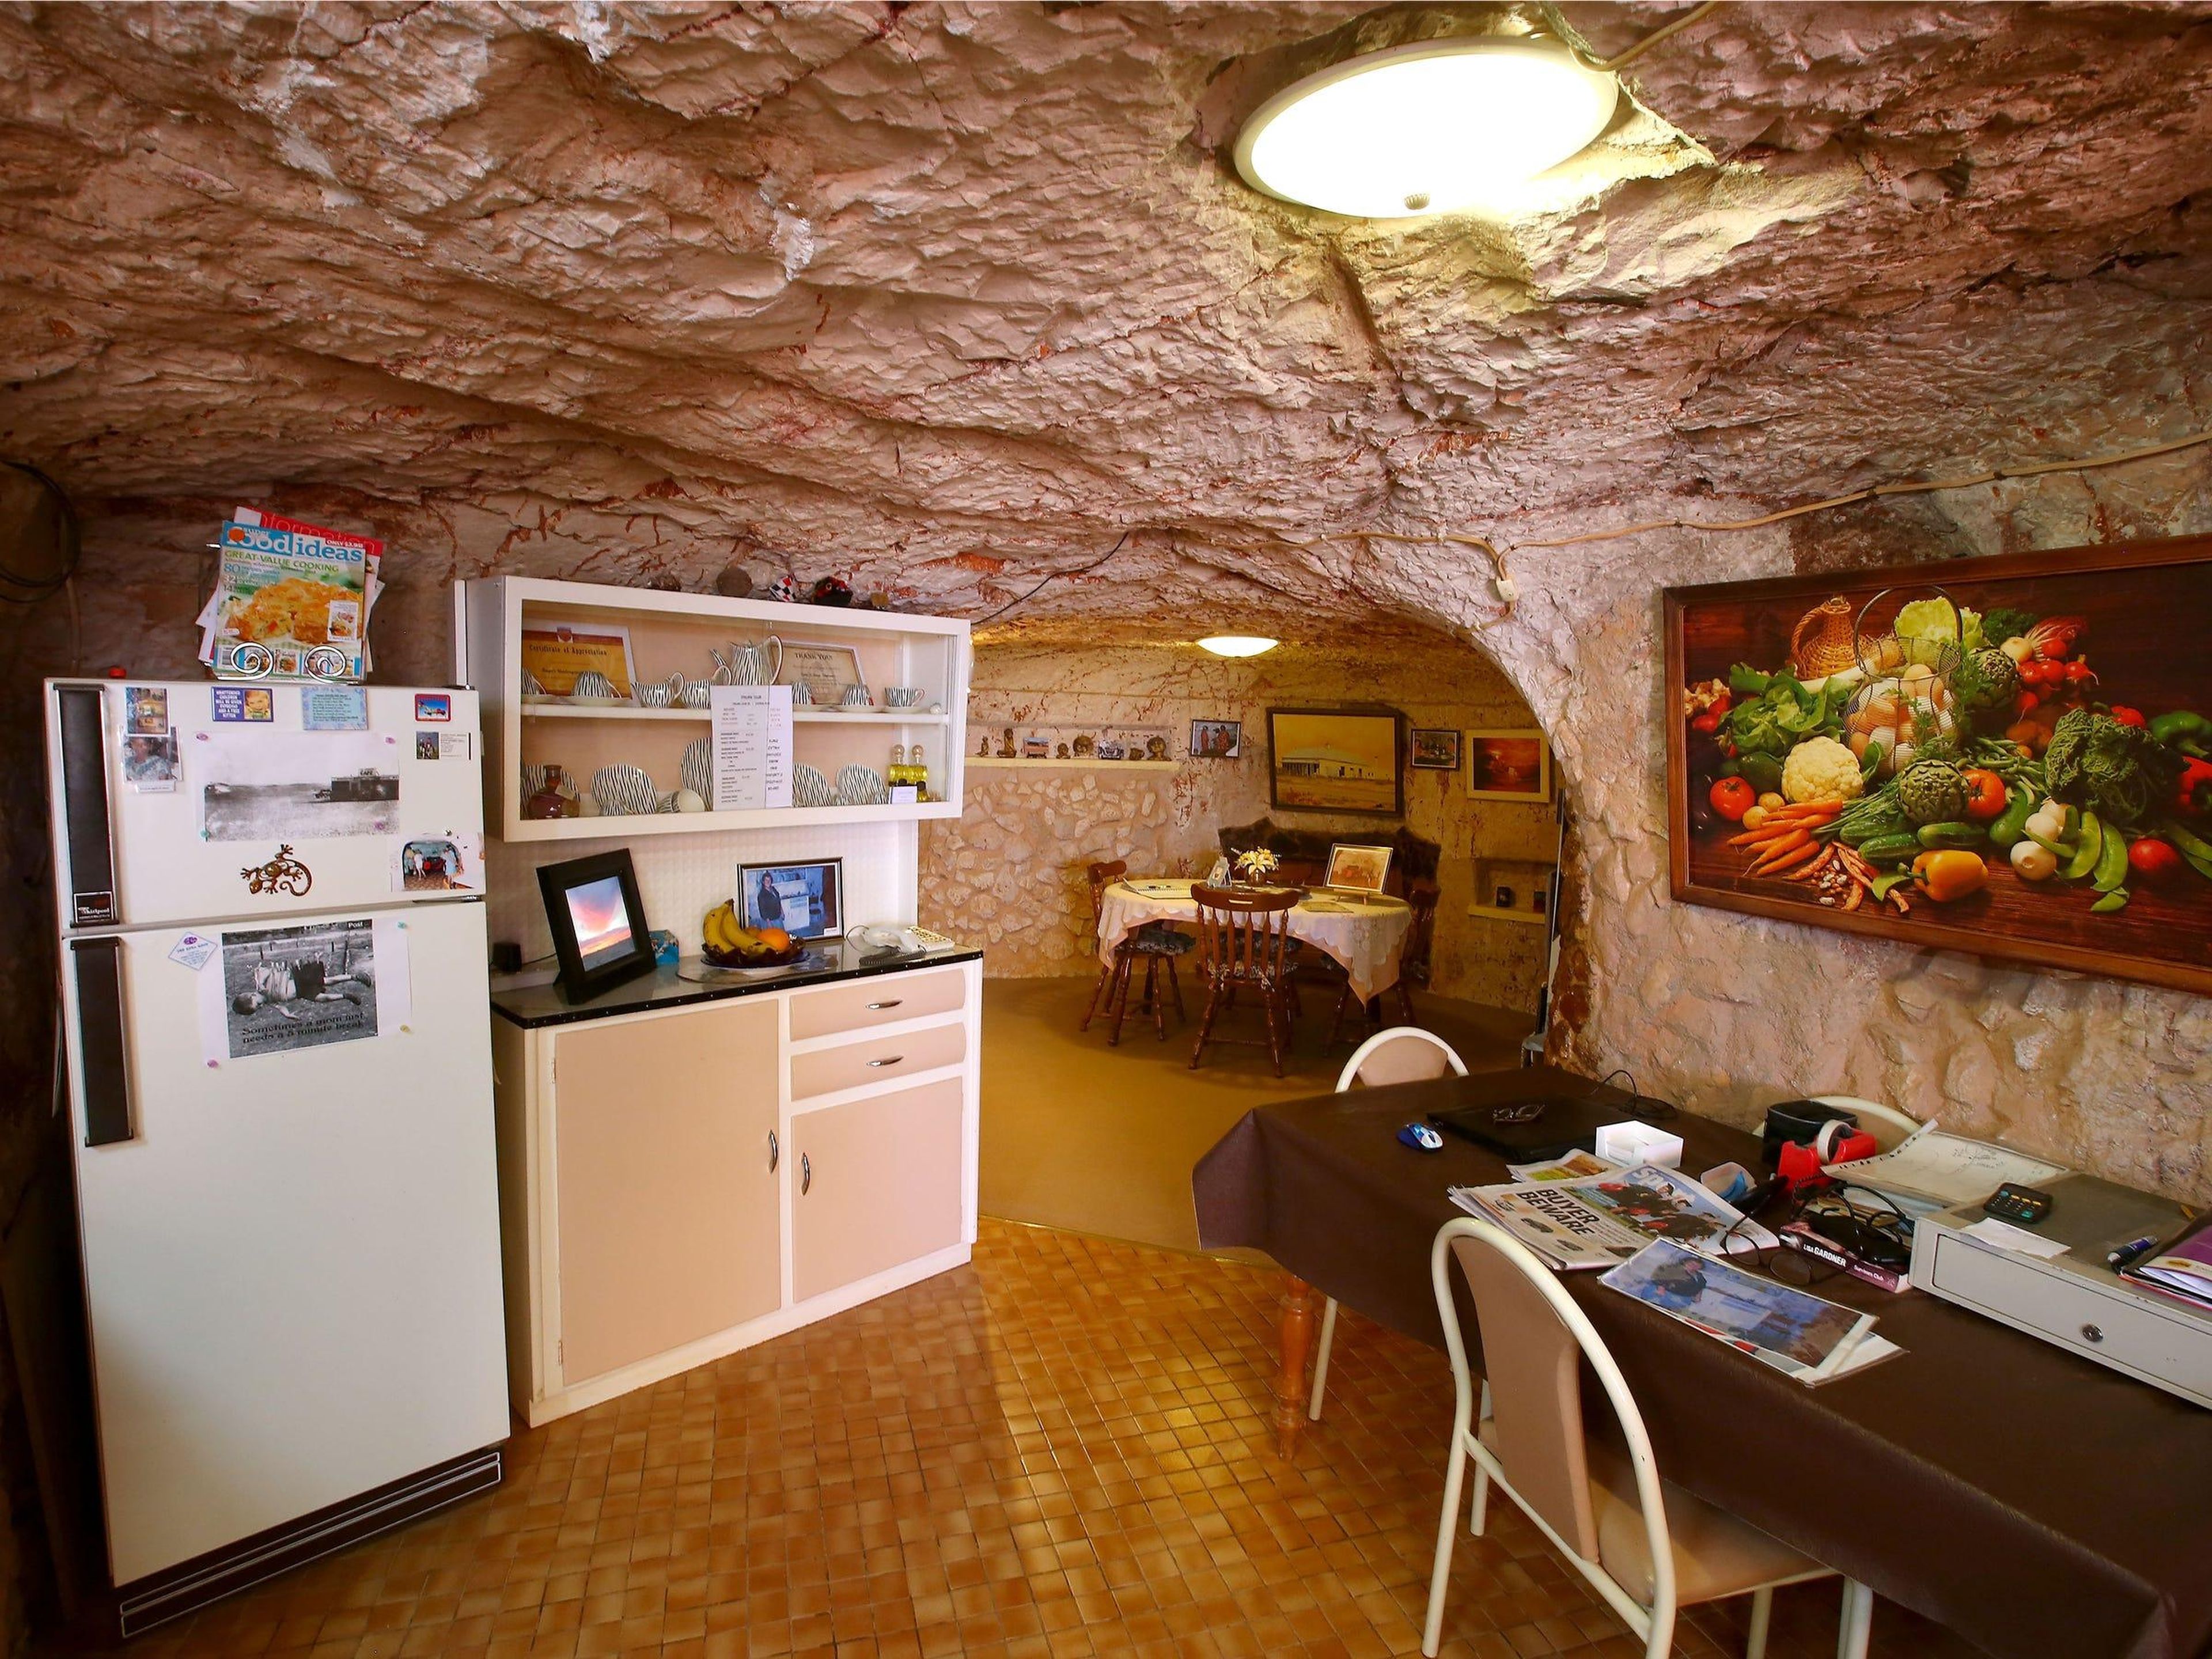 Inside one of the underground homes.